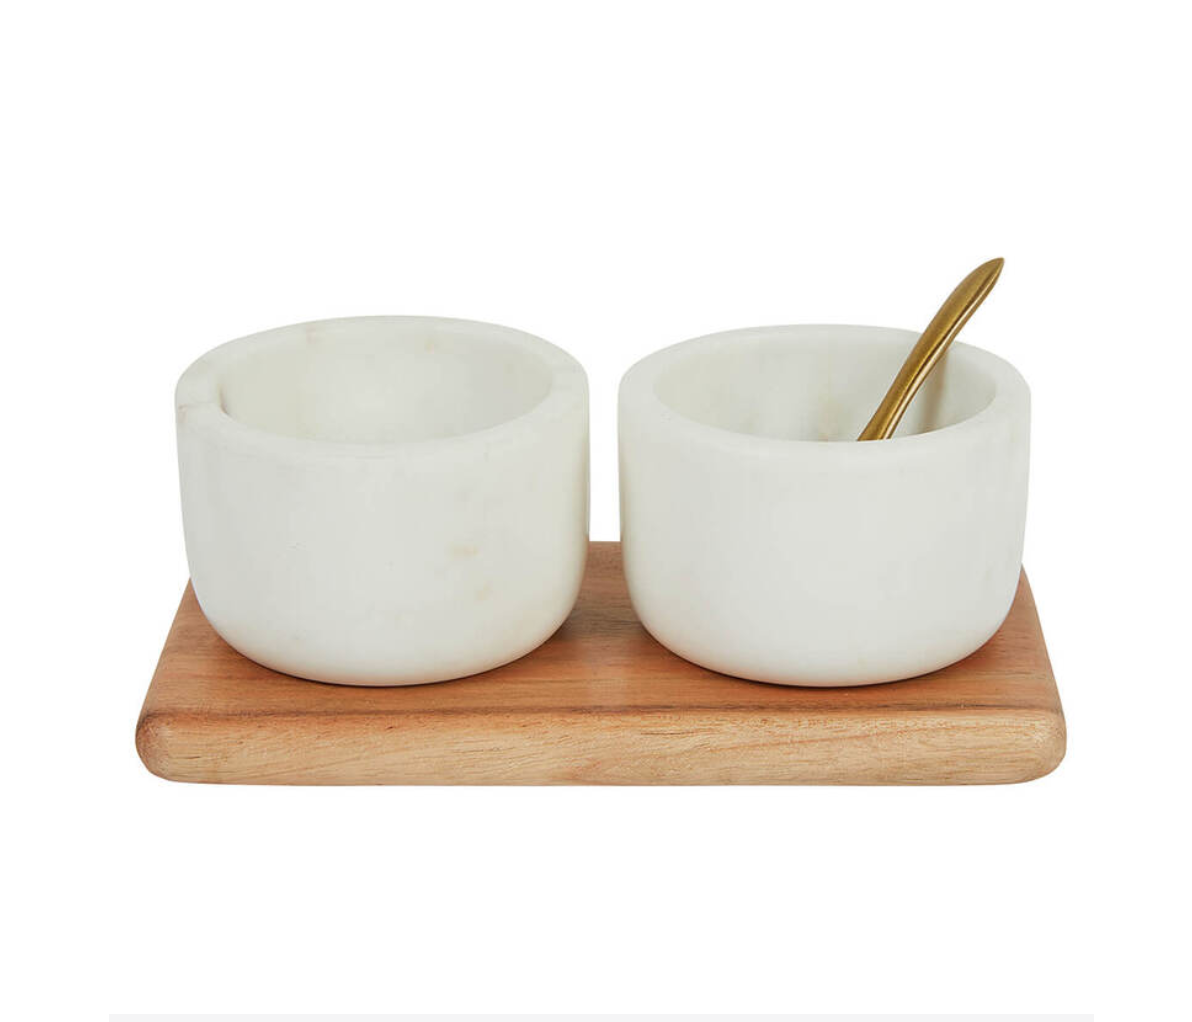 Purchased: Codena Condiment Set of 2